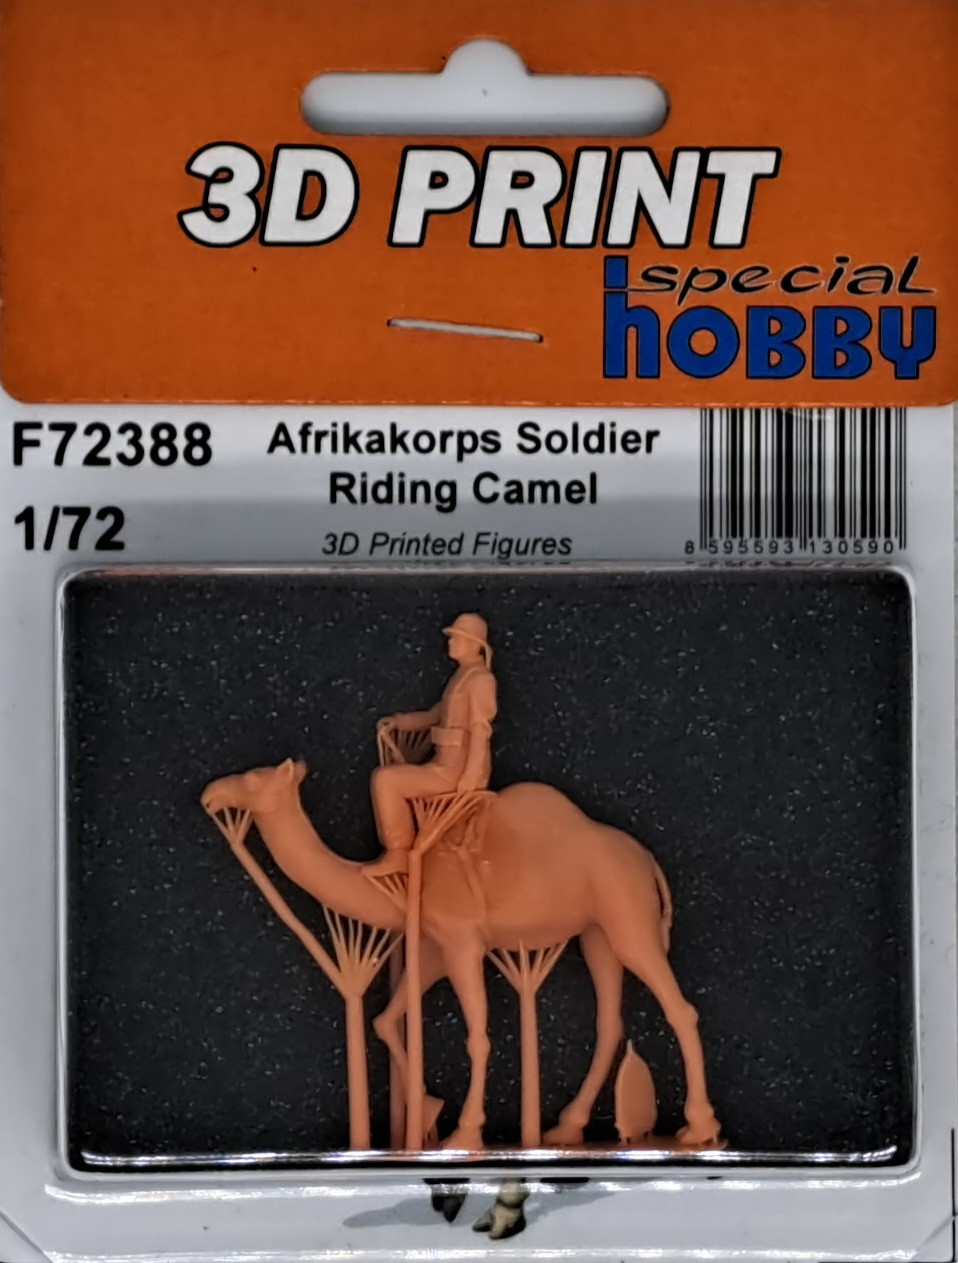 Special Hobby - Afrikakorps Soldier Riding Camel